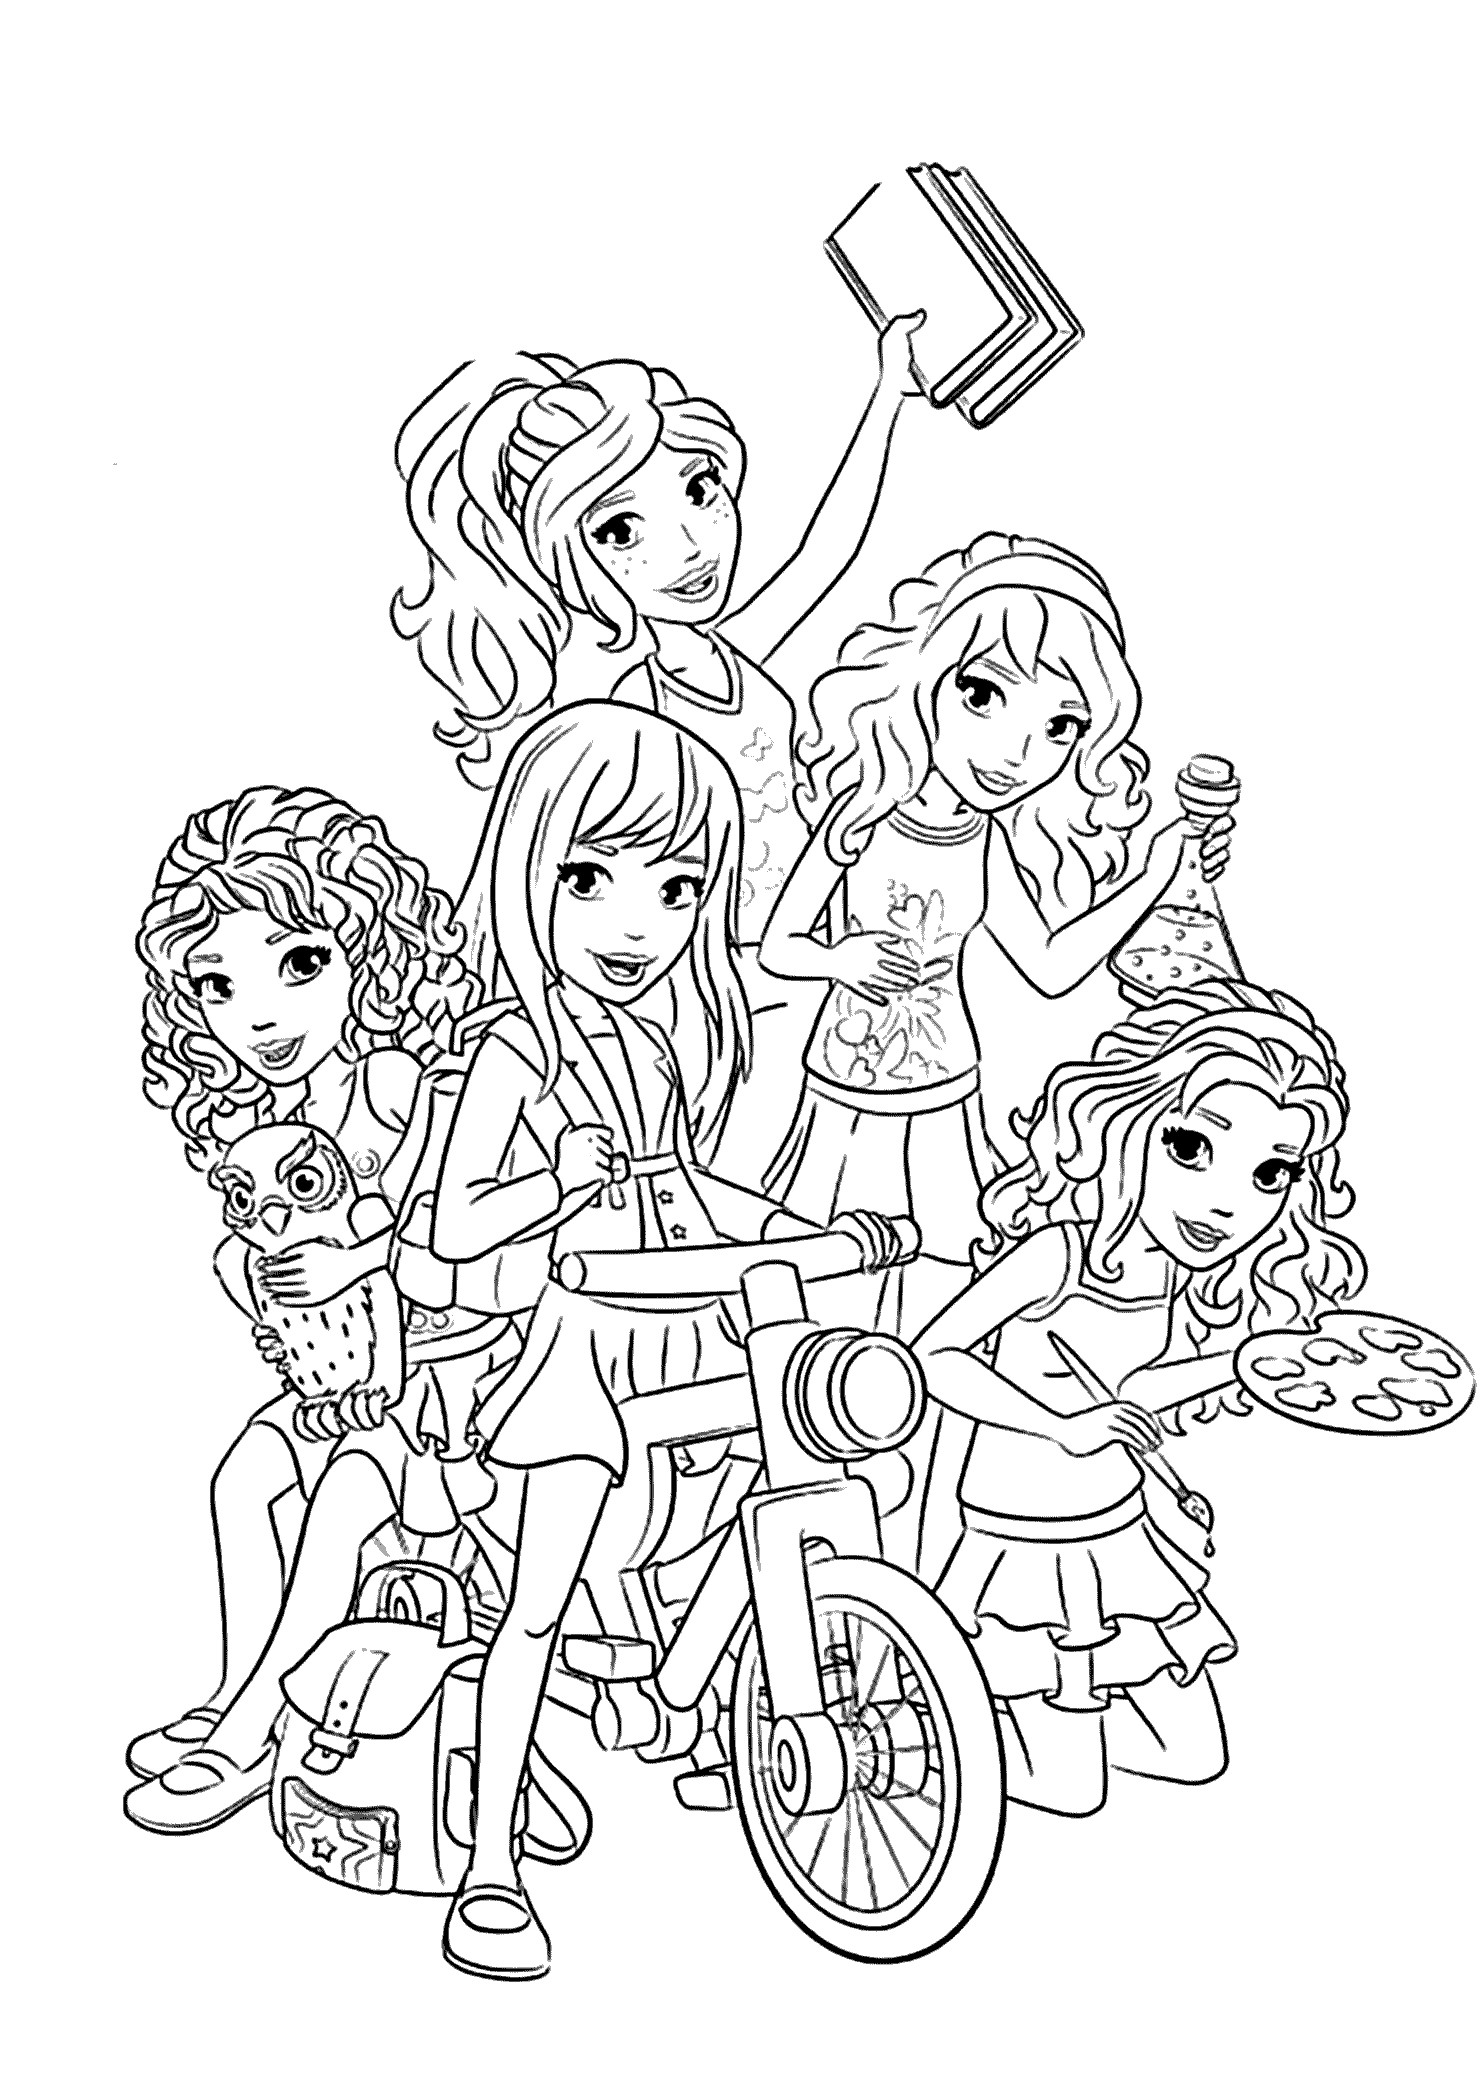 Lego Girl Coloring Pages
 friends coloring pages for girls